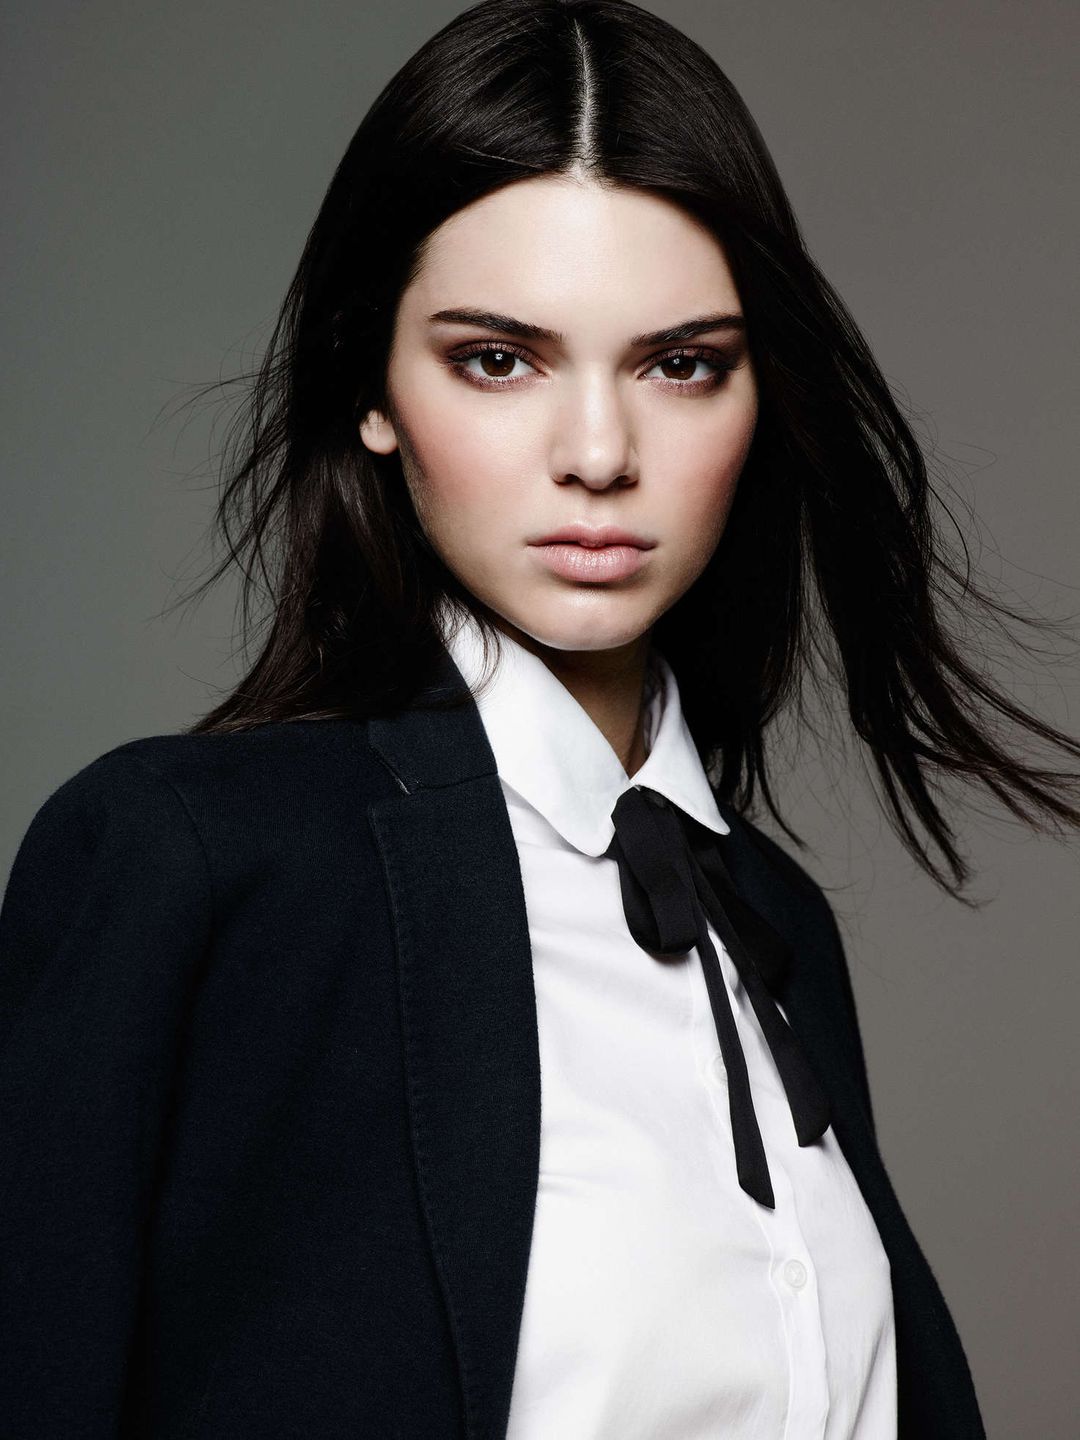 Kendall Jenner personal traits